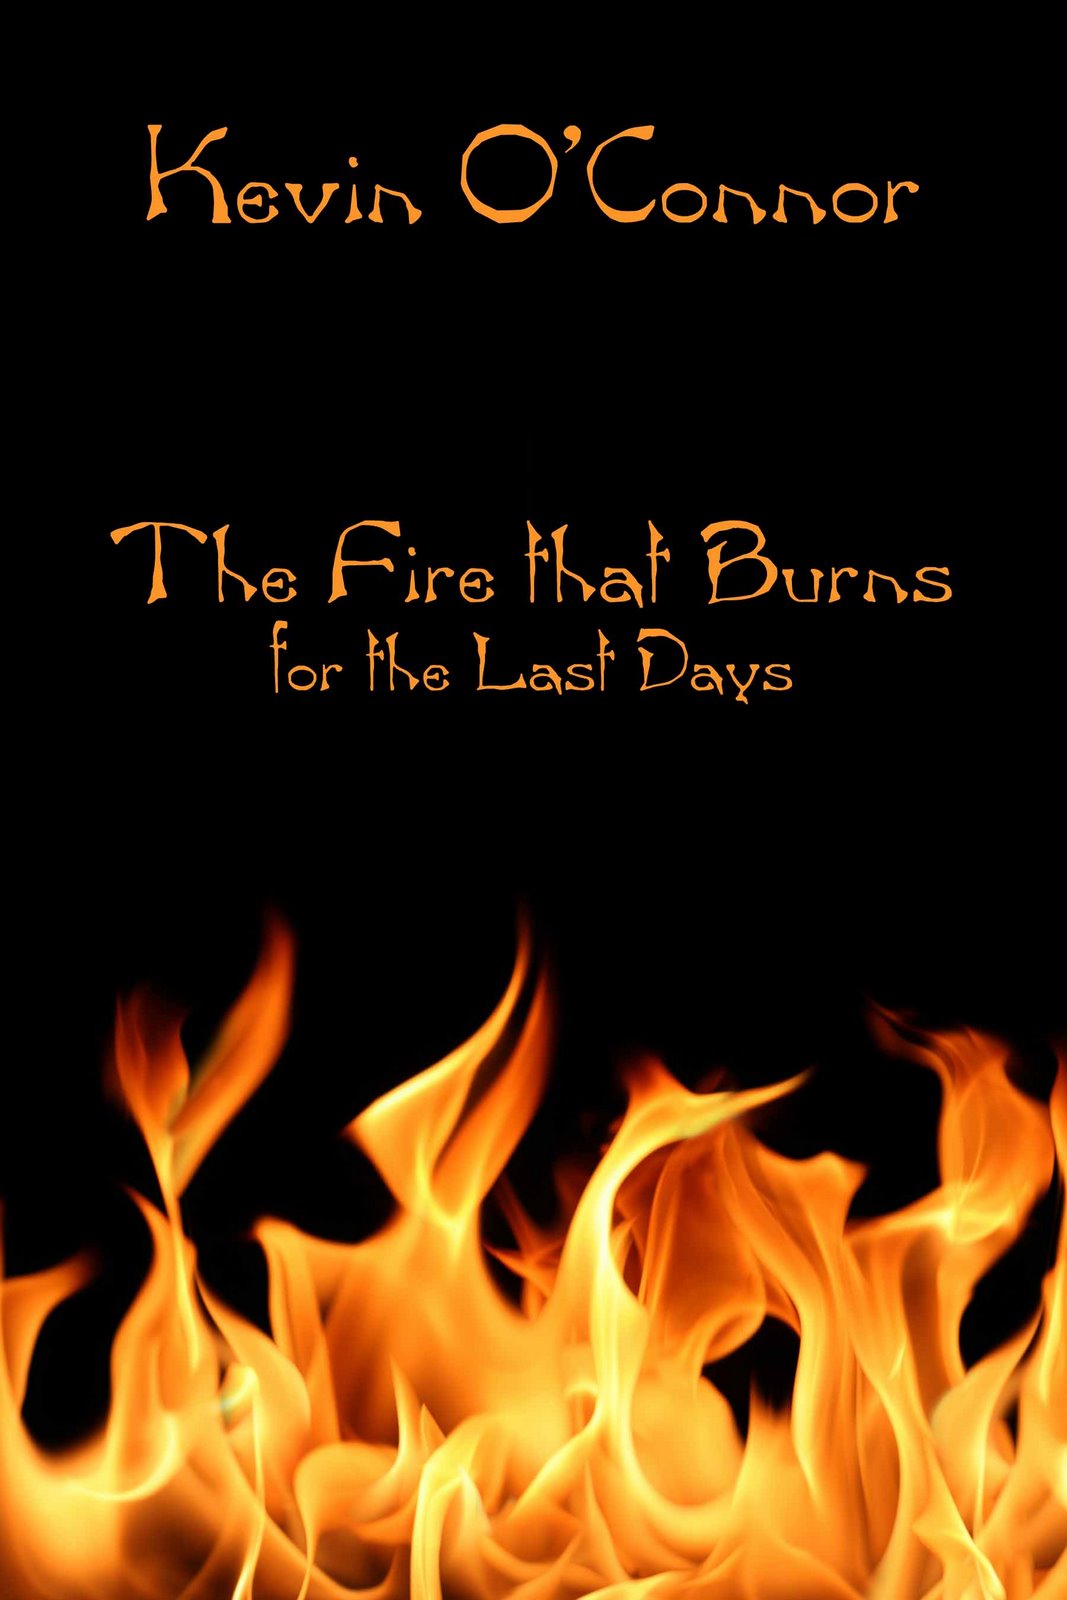 [The+Fire+that+Burns+for+the+Last+Days+cover+Bart+copy.jpg]